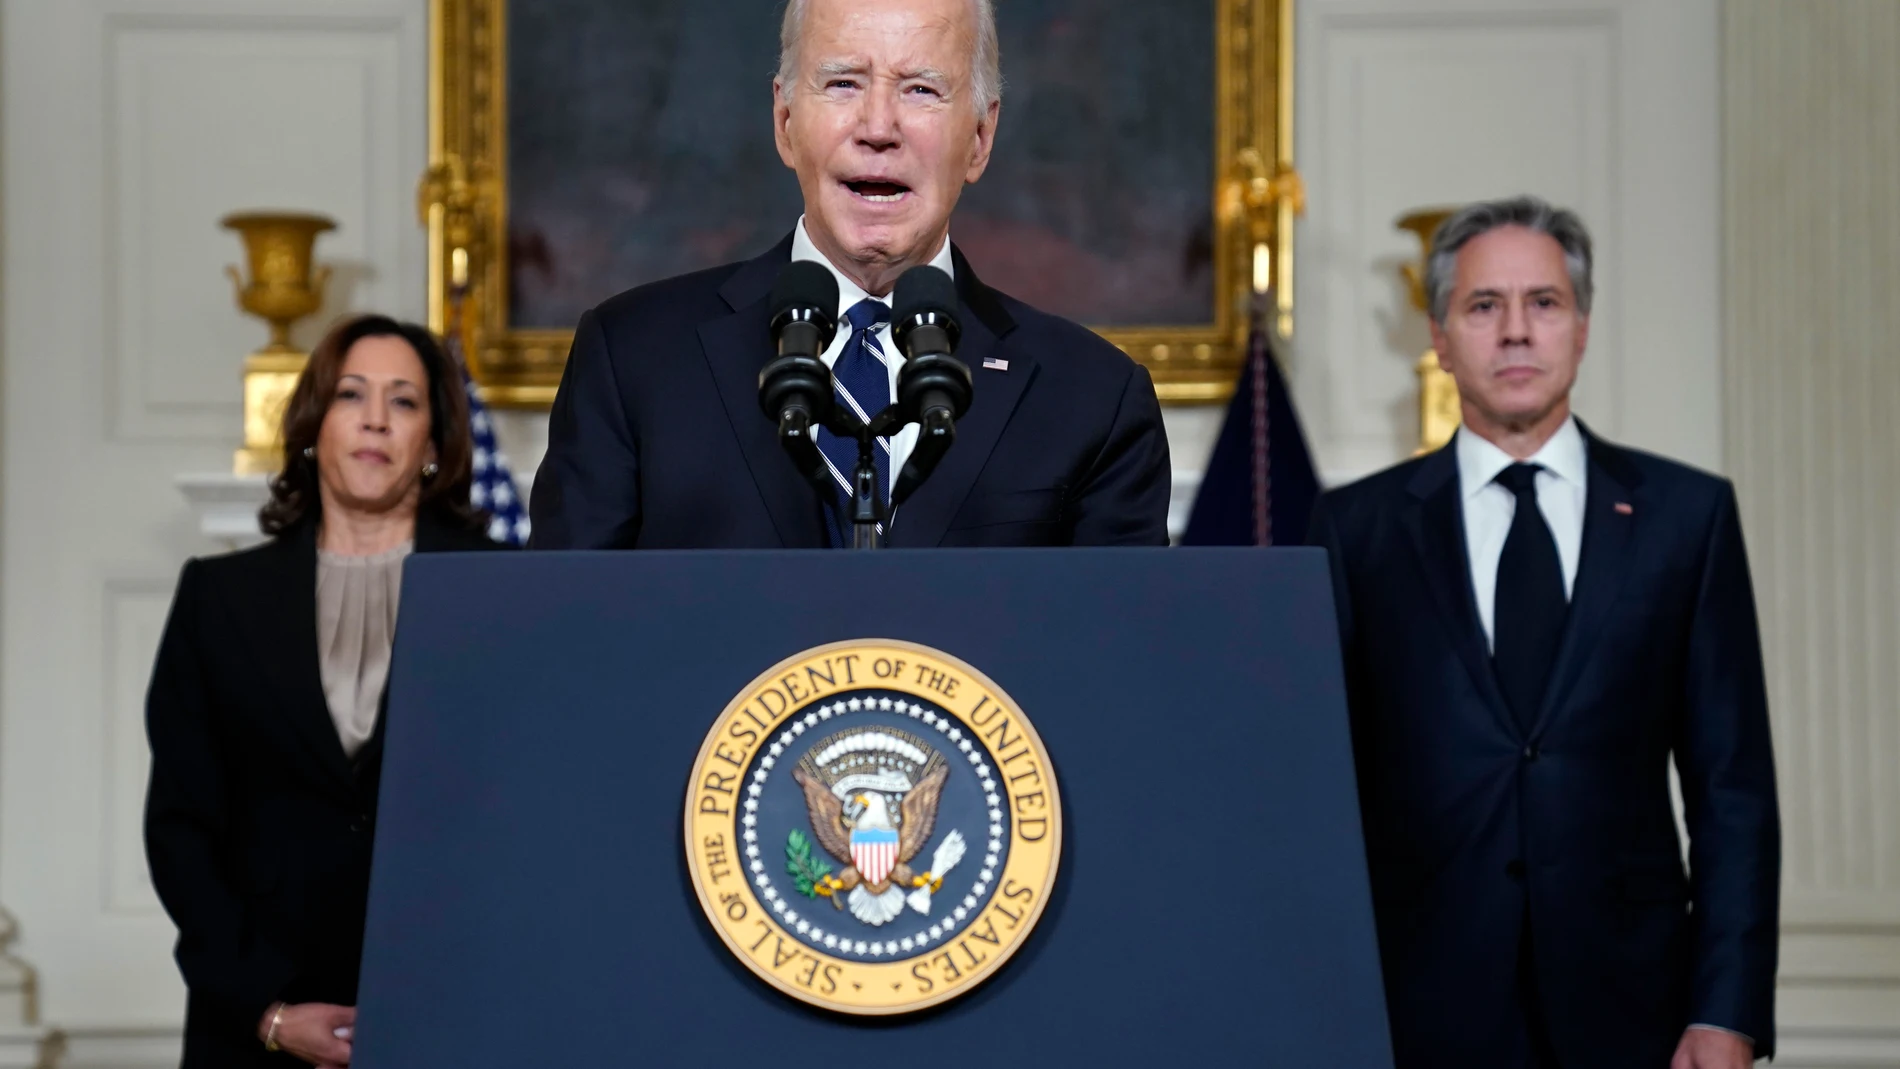 President Joe Biden speaks Tuesday, Oct. 10, 2023, in the State Dining Room of the White House in Washington, about the war between Israel and the militant Palestinian group Hamas, as Vice President Kamala Harris and Secretary of State Antony Blinken listen. (AP Photo/Evan Vucci)